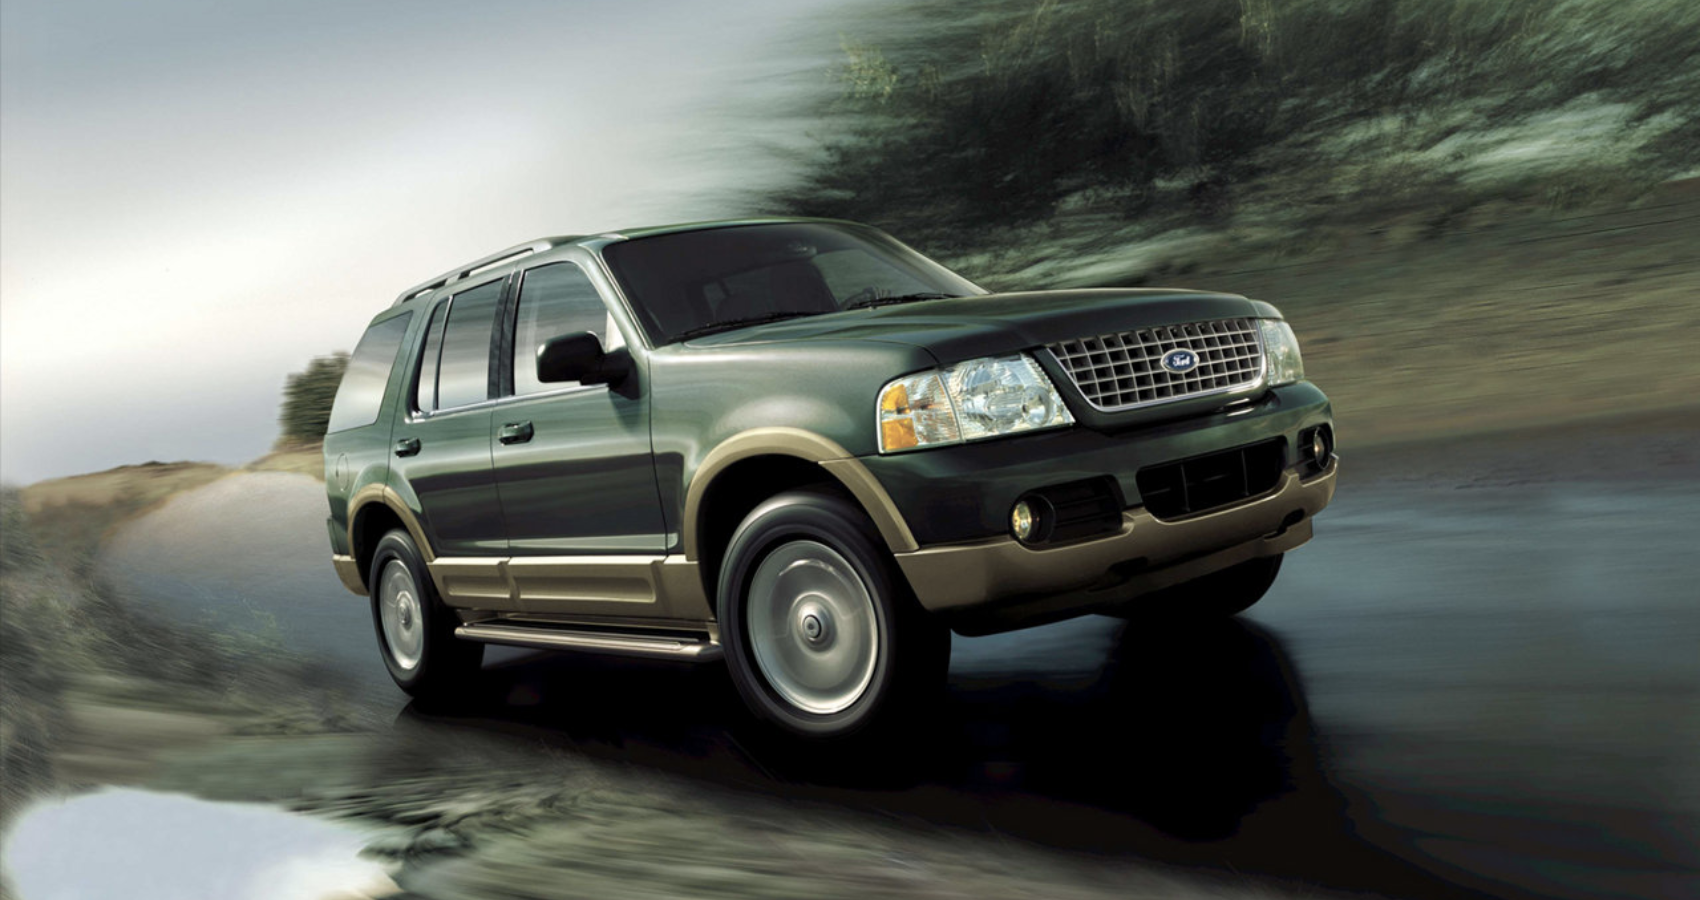 Green 2002 Ford Explorer on the road